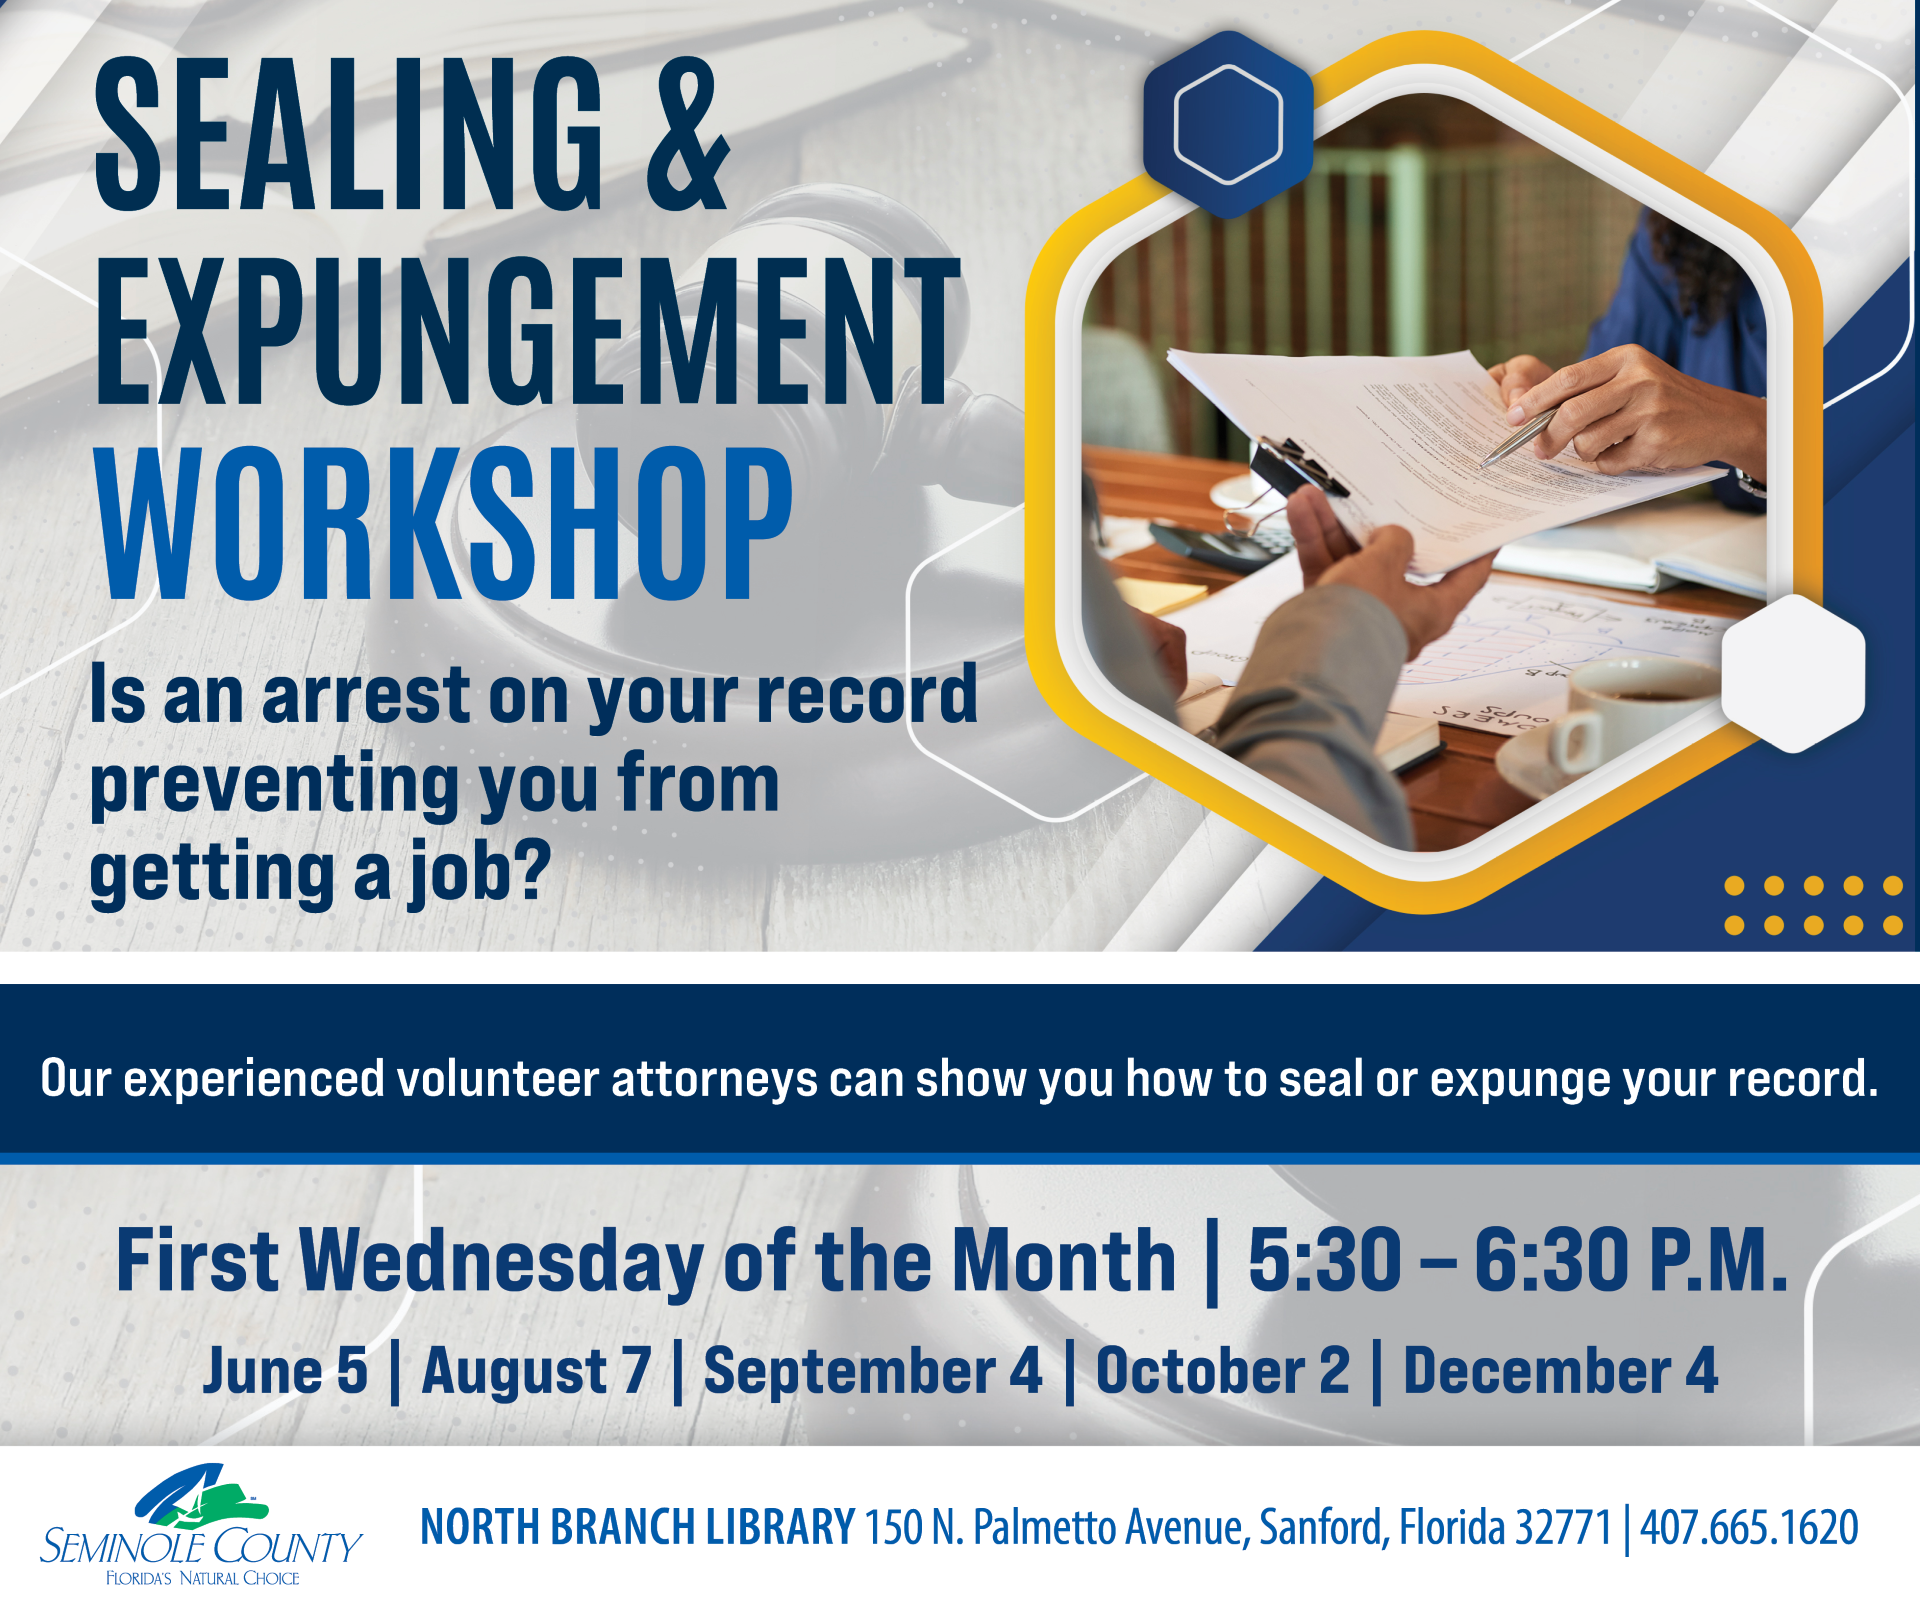 Sealing and Expungement Workshop at North Branch Library